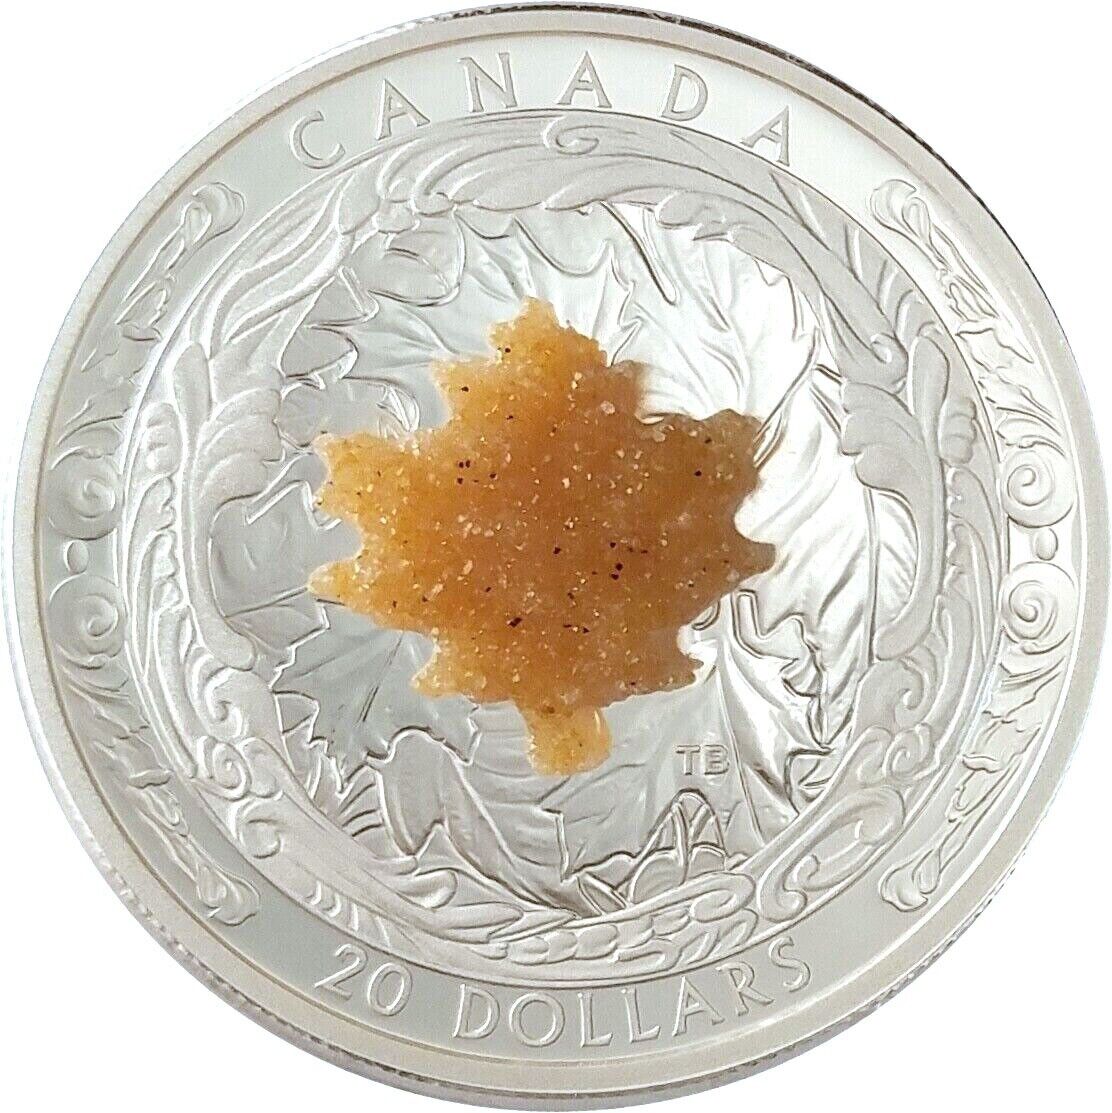 1 Oz Silver Coin 2016 $20 Canada Majestic Maple Leaves with Drusy Stone-classypw.com-3